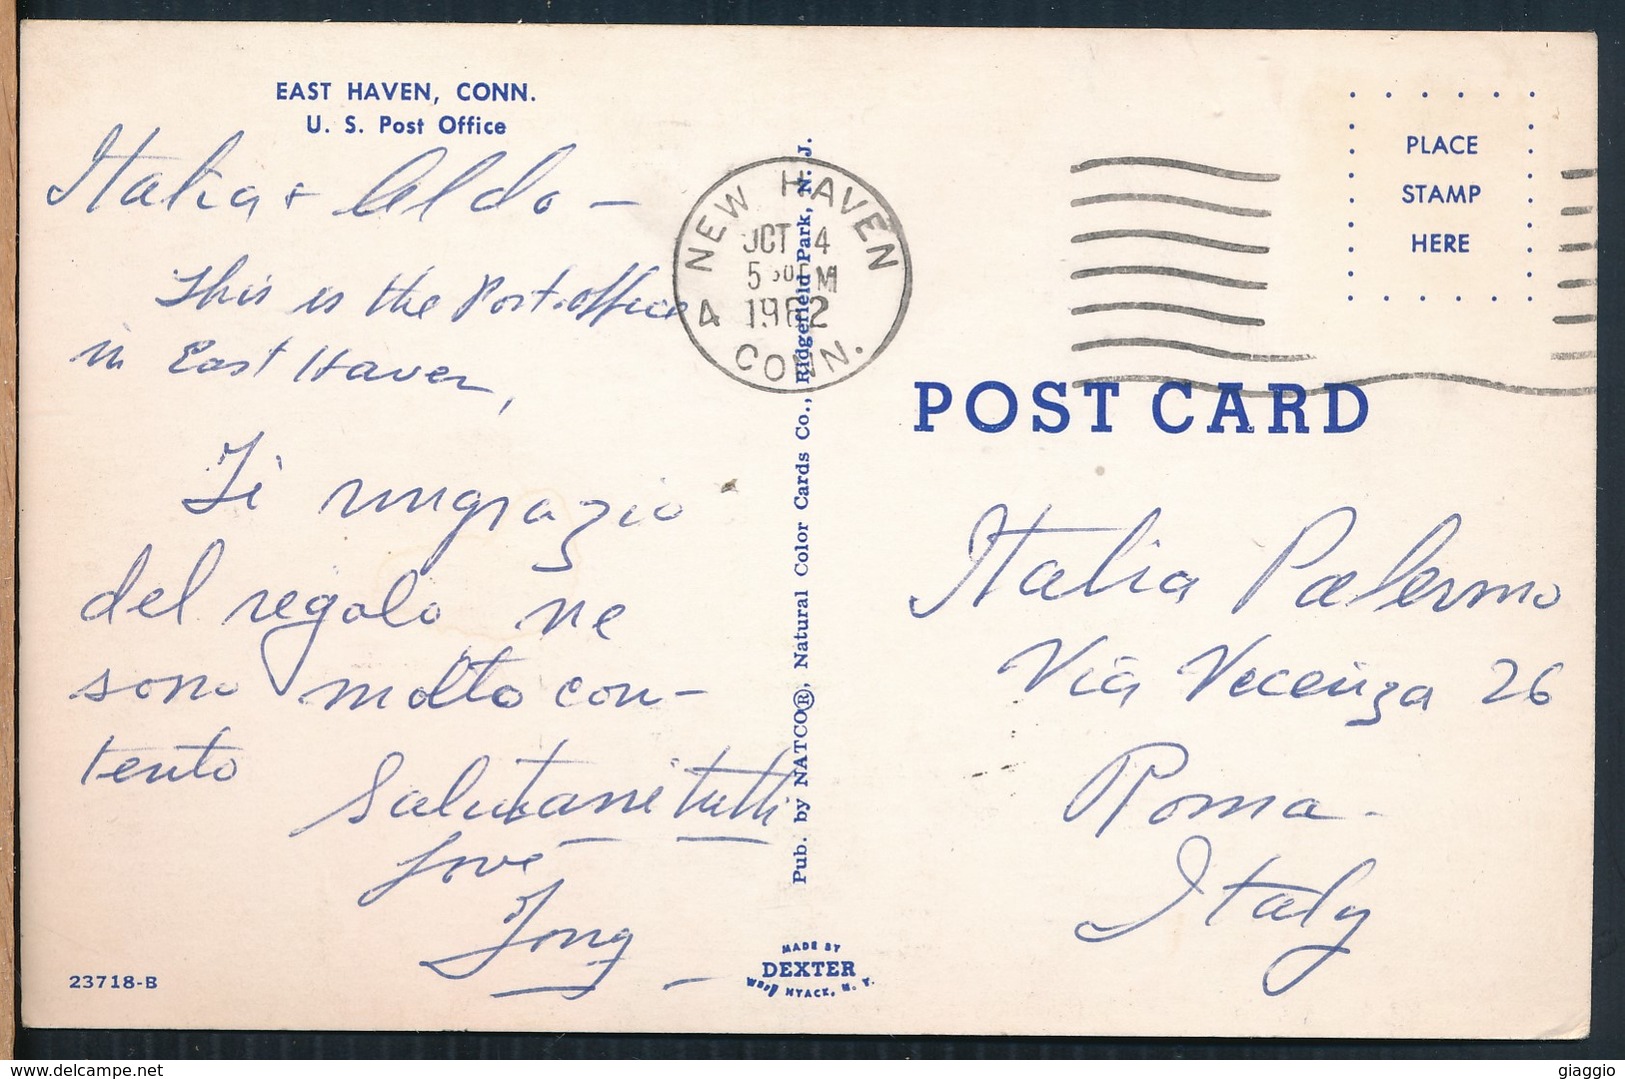 °°° 19615 - USA - CT - EAST HAVEN - U.S. POST OFFICE - 1962 °°° - New Haven